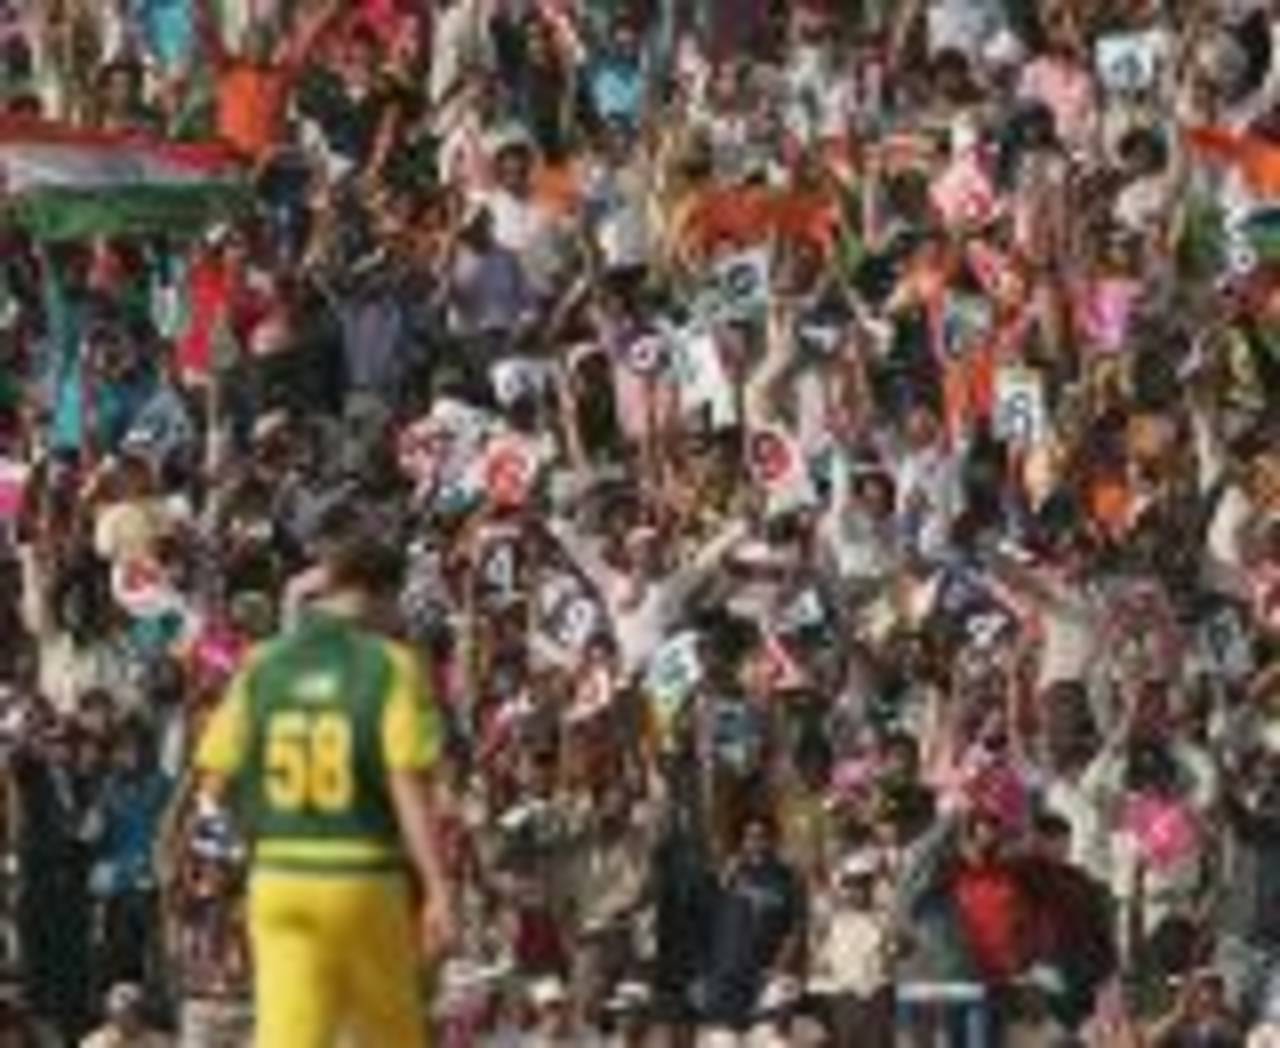 The crowds welcome Brett Lee after an expensive over, India v Australia, 18th match, Champions Trophy, October 29, 2006